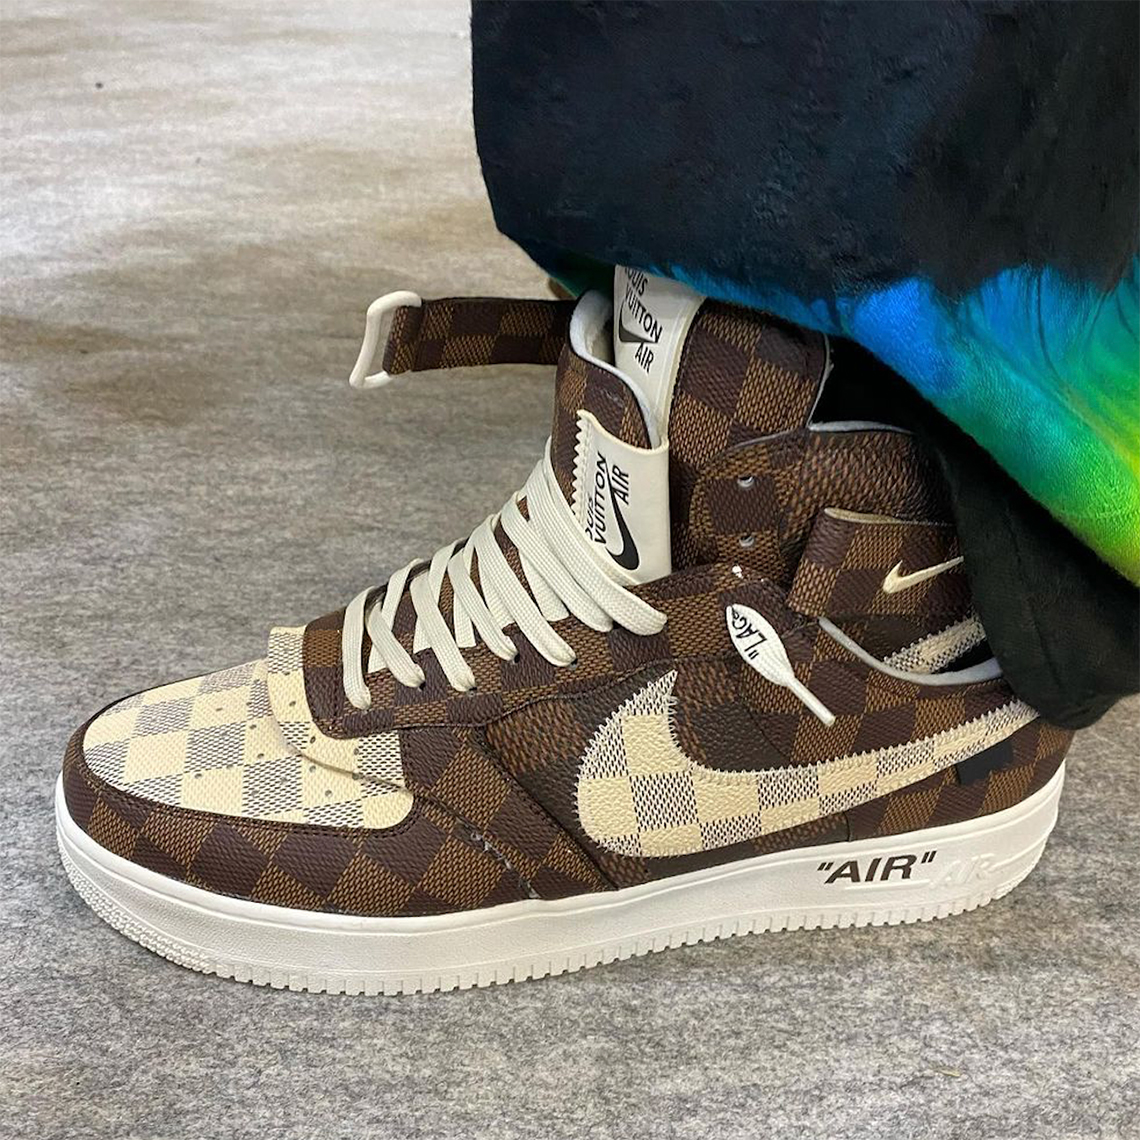 Louis Vuitton Nike Air Force 1 Low Release Date | SneakerNews.com